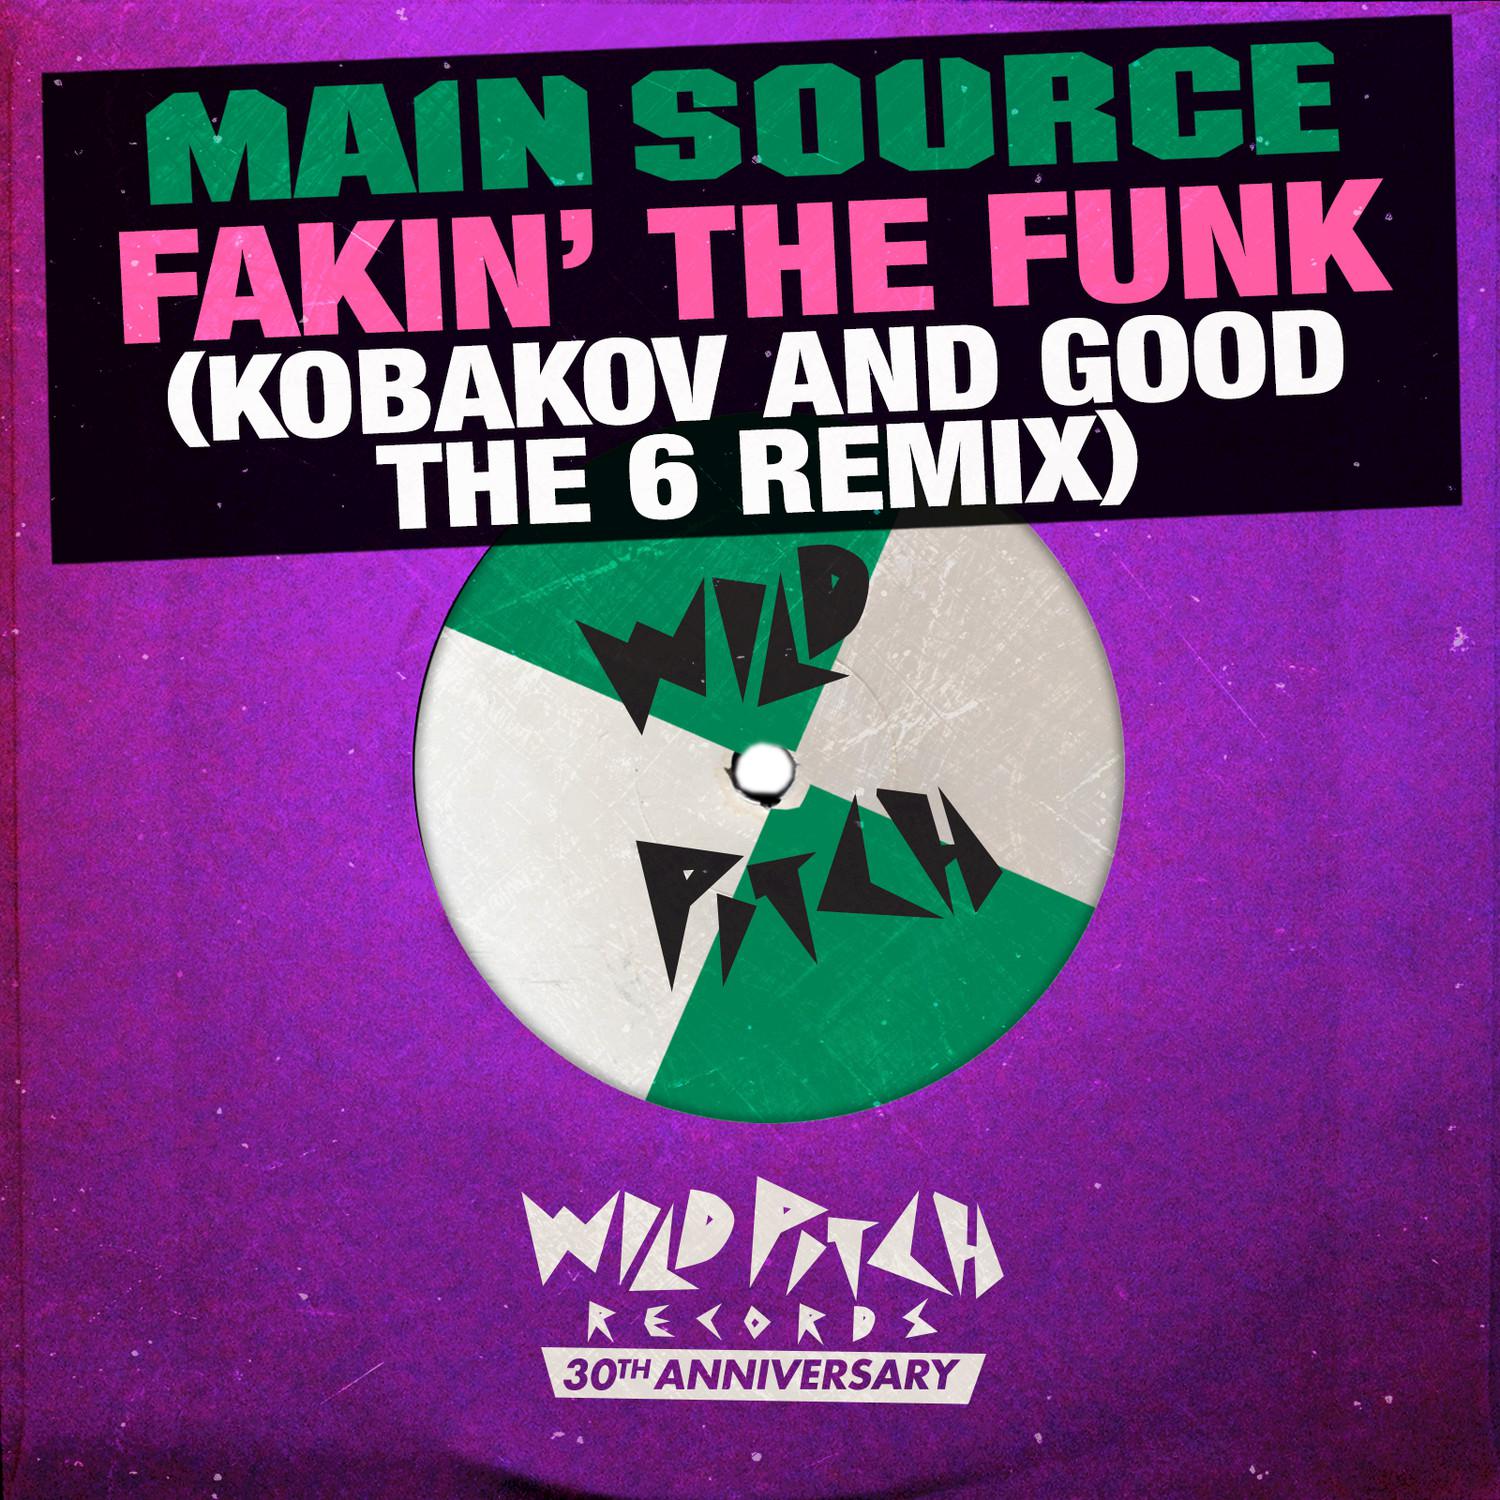 Fakin' the Funk (Kobakov and Good The 6 Remix)